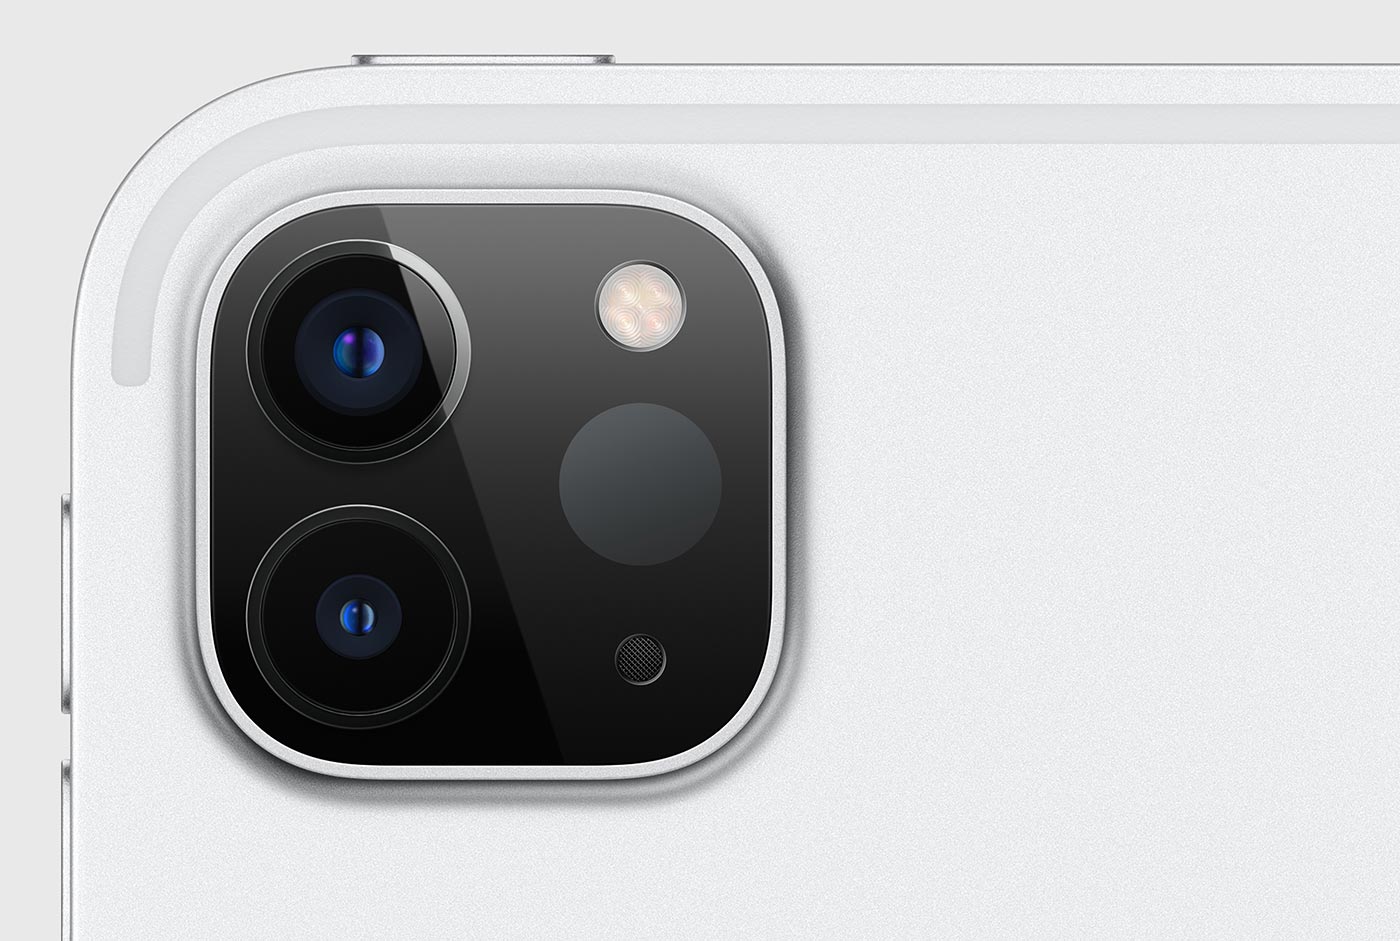  The image shows the camera system of the iPad Pro M4, which has three lenses and a flash.